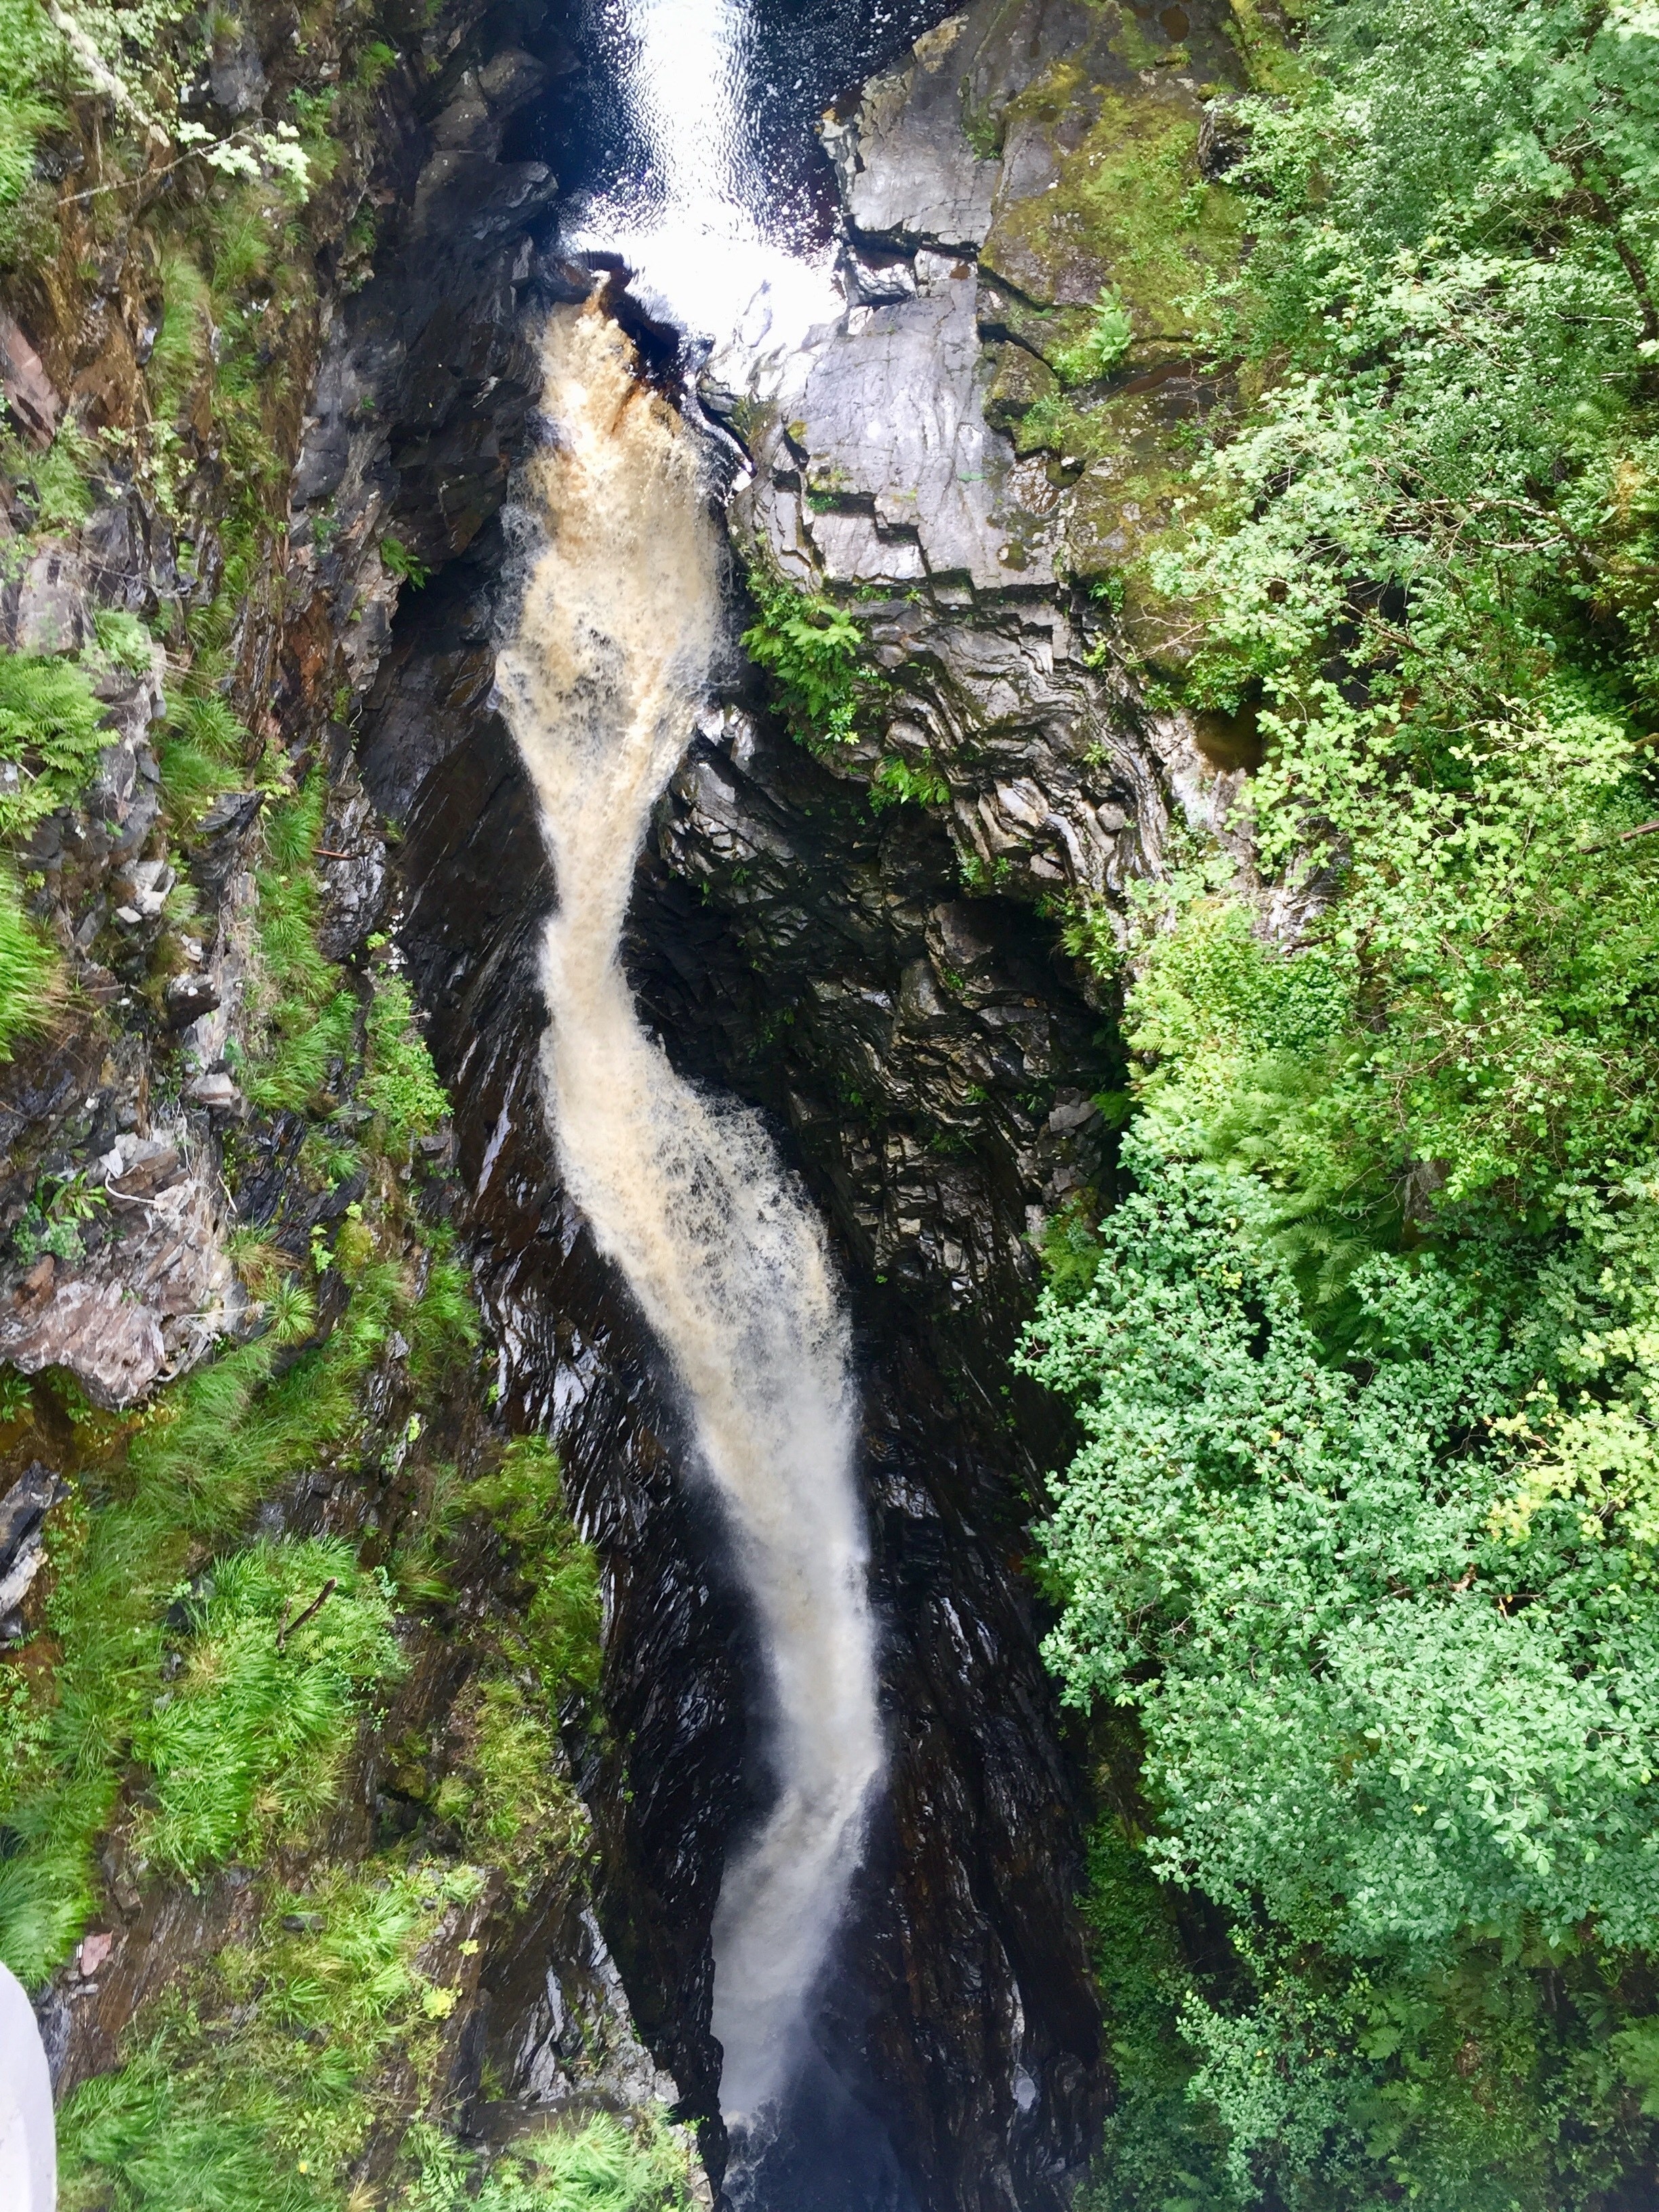 This plunging box canyon, through which the River Droma rushes, is one of the natural wonders of the Scottish Highlands. Follow the pleasant woodland trails, cross the Victorian suspension bridge over the tree-lined gorge, and look down on the torrent of water crashing 45m over the Falls of Measach.